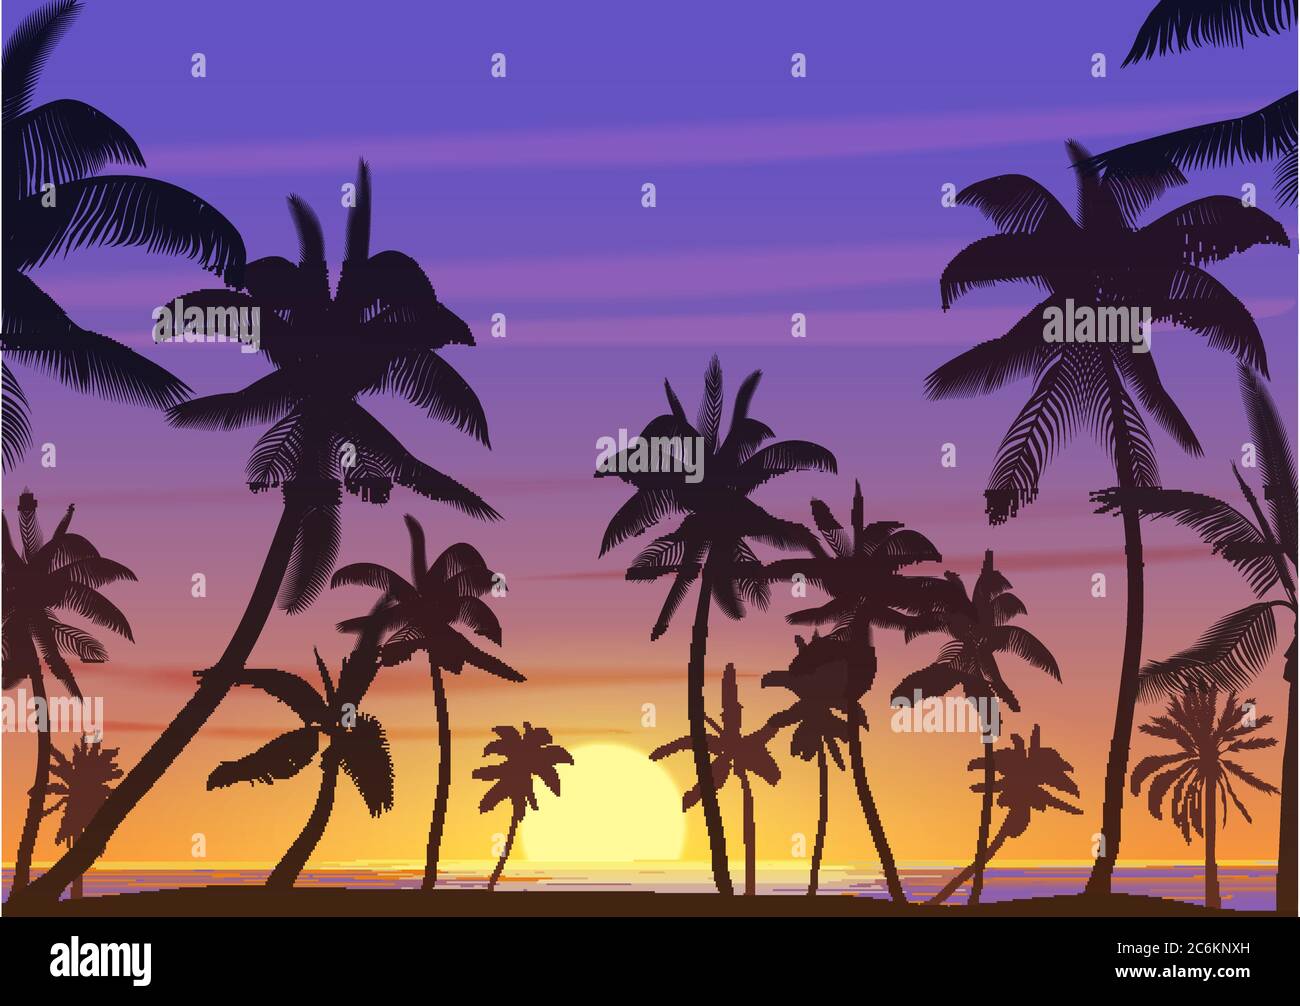 Palm coconut trees Silhouette at sunset or sunrise. Realistic vector illustration. Earth paradise on the beach Stock Vector